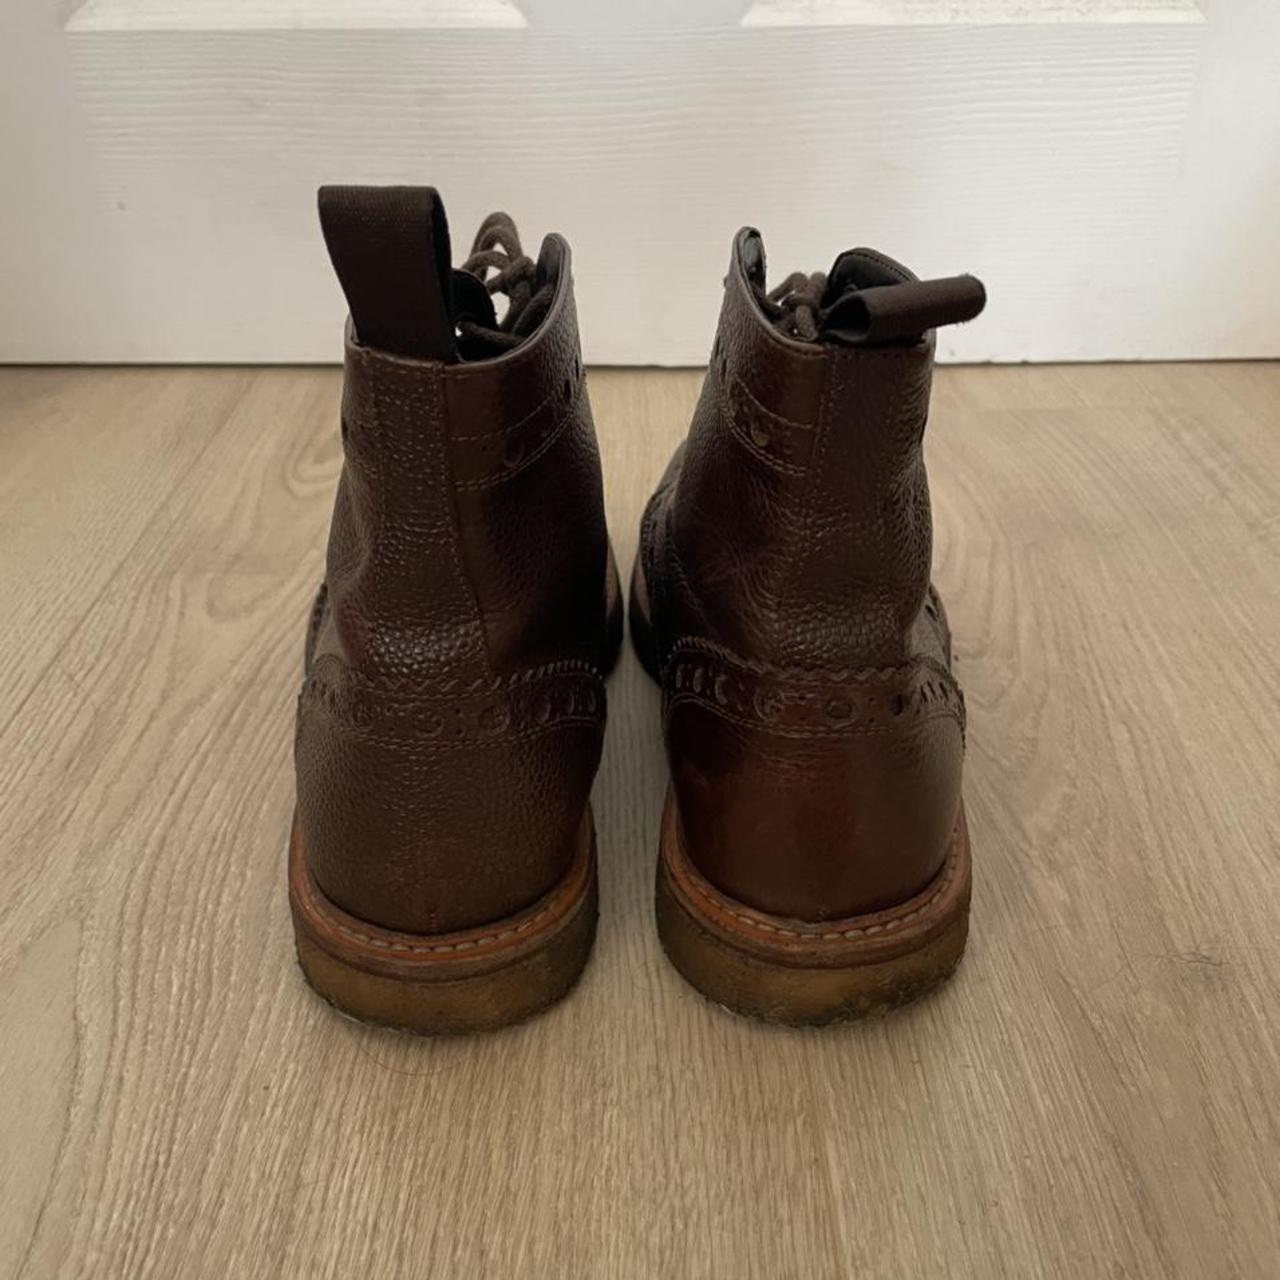 Paul Smith Brown Brogue boots Leathers boots with a... - Depop